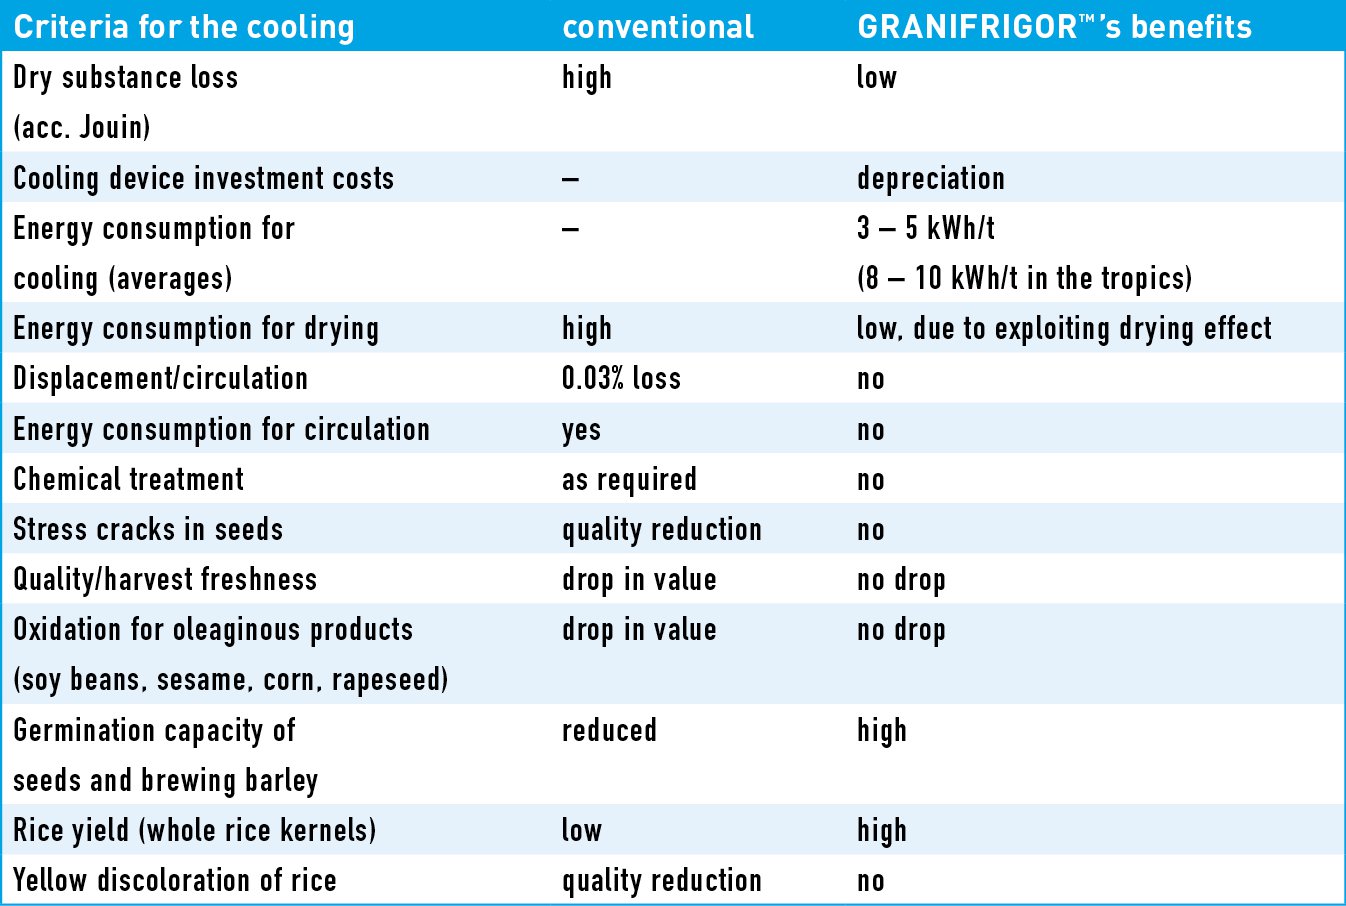 Effect of grain cooling on loss of dry substance